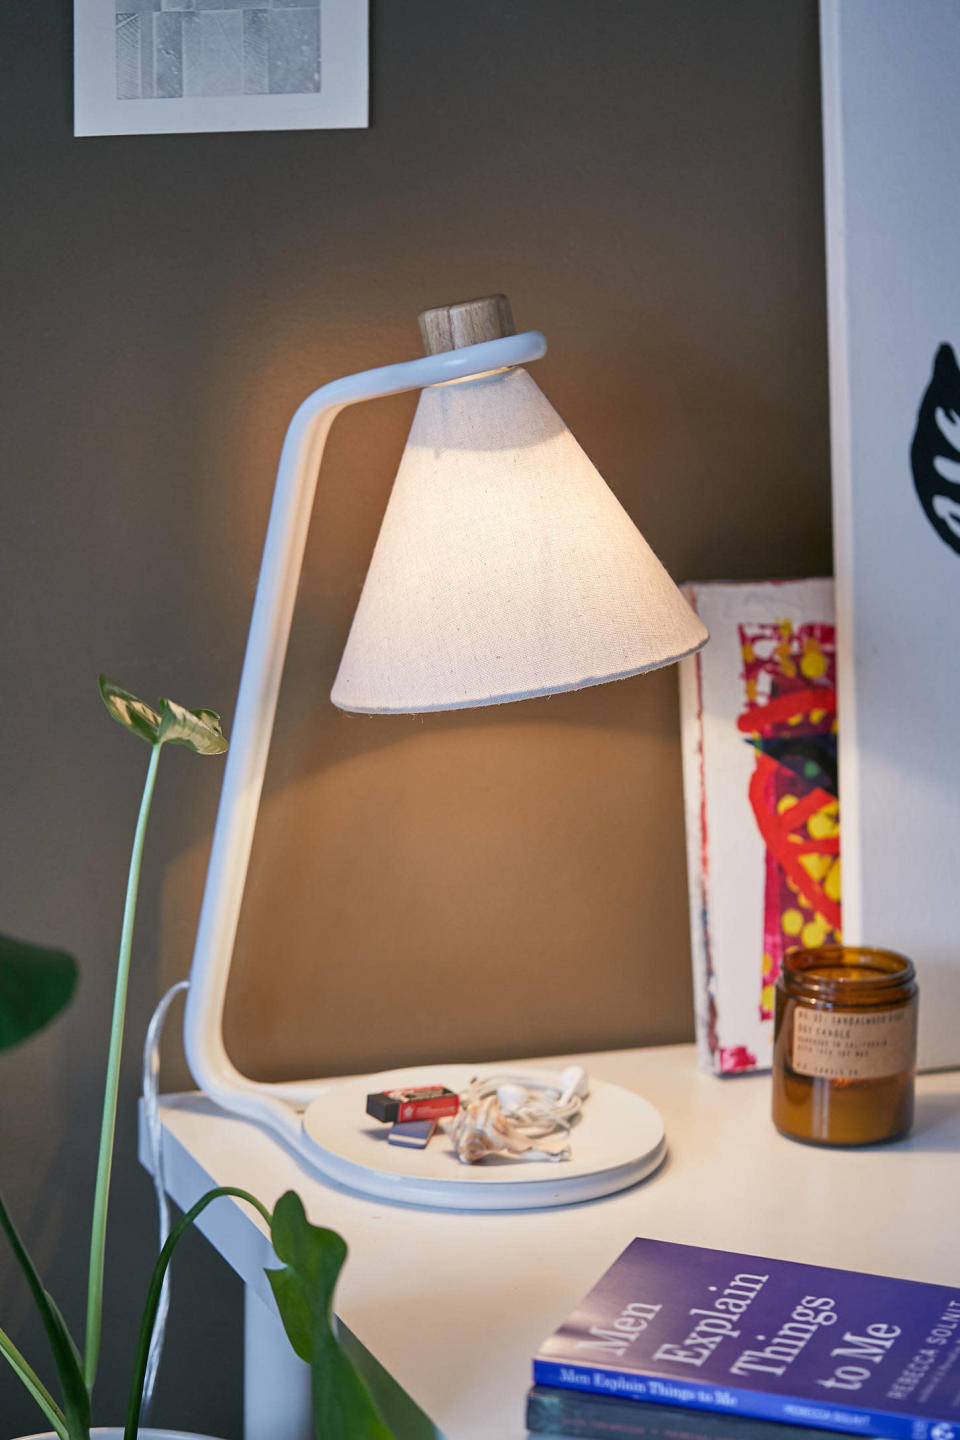 <h2>Hayes Desk Lamp</h2><br>A lamp that doubles as a brightener and catch-all storage container. <br><br><strong>Urban Outfitters</strong> Hayes Desk Lamp, $, available at <a href="https://go.skimresources.com/?id=30283X879131&url=https%3A%2F%2Fwww.urbanoutfitters.com%2Fshop%2Fhayes-desk-lamp%3F" rel="nofollow noopener" target="_blank" data-ylk="slk:Urban Outfitters" class="link ">Urban Outfitters</a>